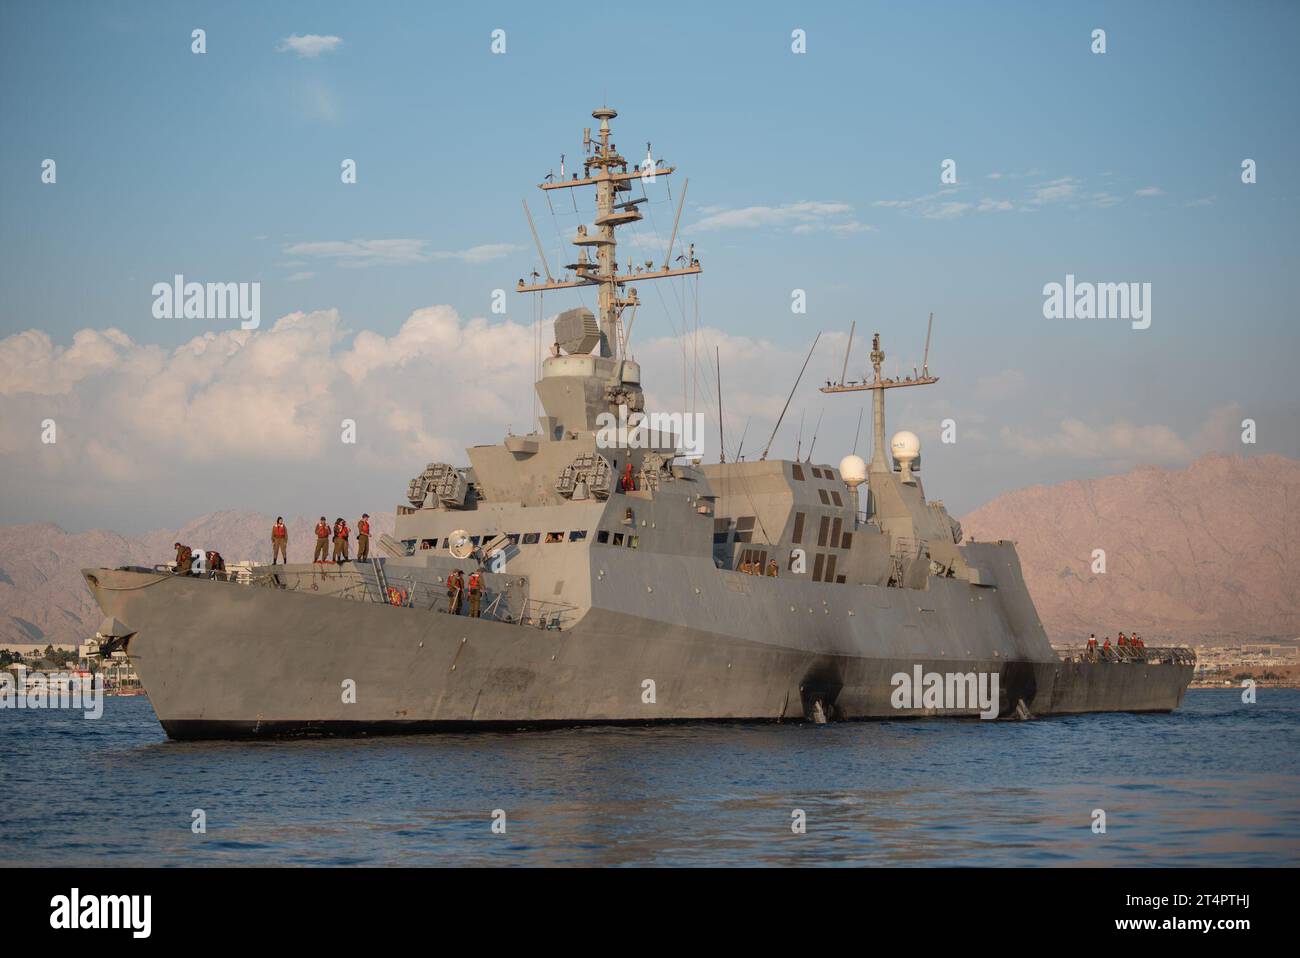 (231101) -- JERUSALEM, Nov. 1, 2023 (Xinhua) -- An Israeli Navy missile boat is seen in the area of the Red Sea on Nov. 1, 2023. Israel sent missile boats to the Red Sea, the army said on Wednesday after Houthi forces in Yemen fired missiles and drones toward Israel's resort city of Eilat. 'Israeli Navy missile boats arrived in the area of the Red Sea,' the Israel Defense Forces (IDF) said in a statement, noting the move was made following a 'situational assessment and as part of defensive efforts in the area.' (IDF/Handout via Xinhua) Stock Photo